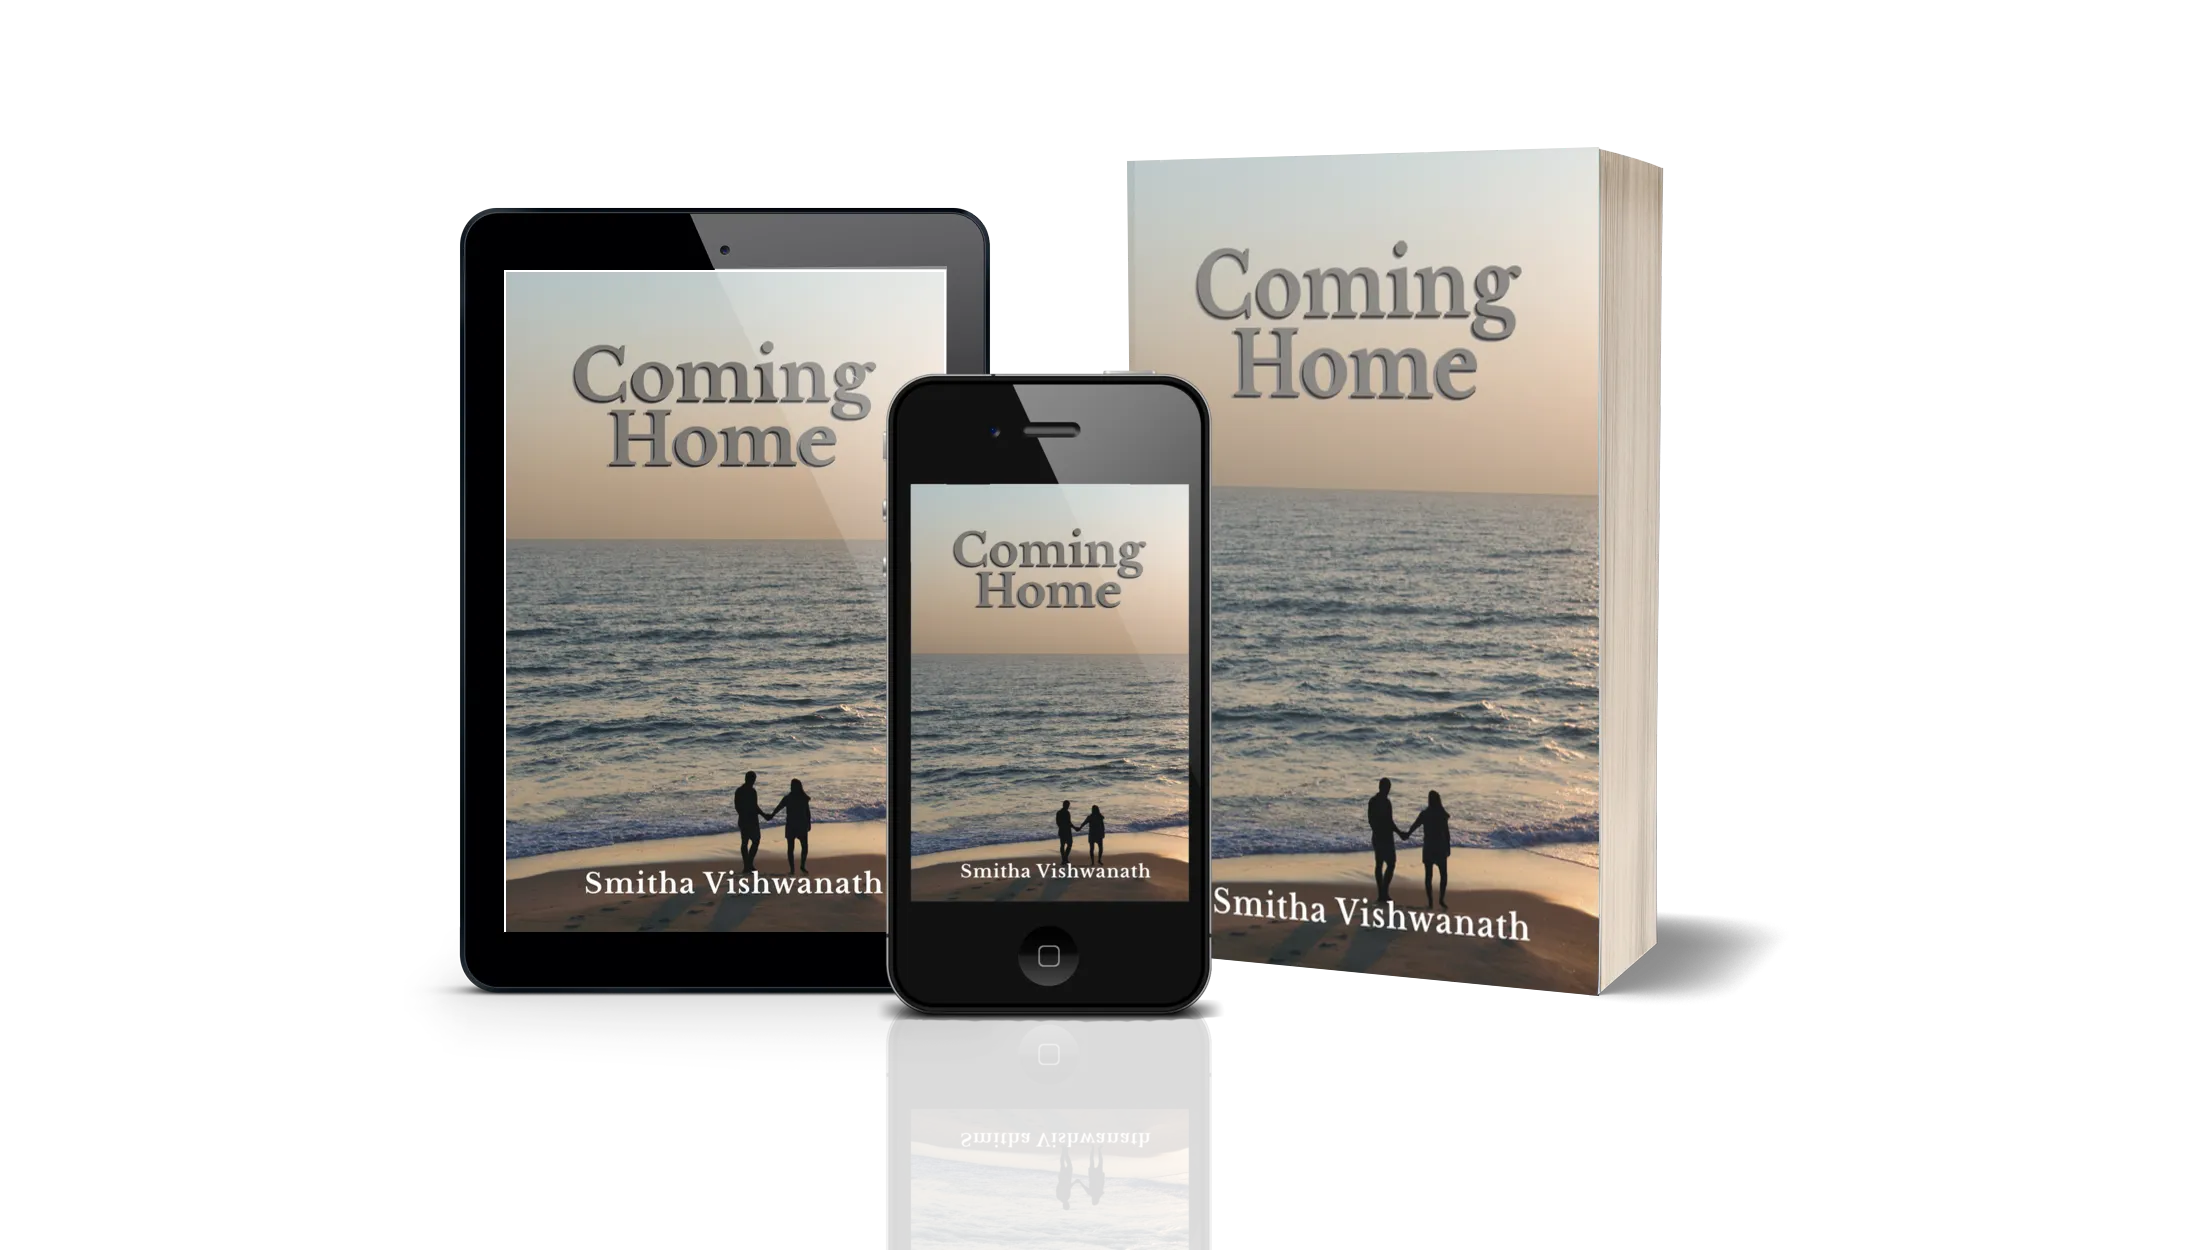 Happy Sunday:  ‘Coming Home’ is now available in most countries